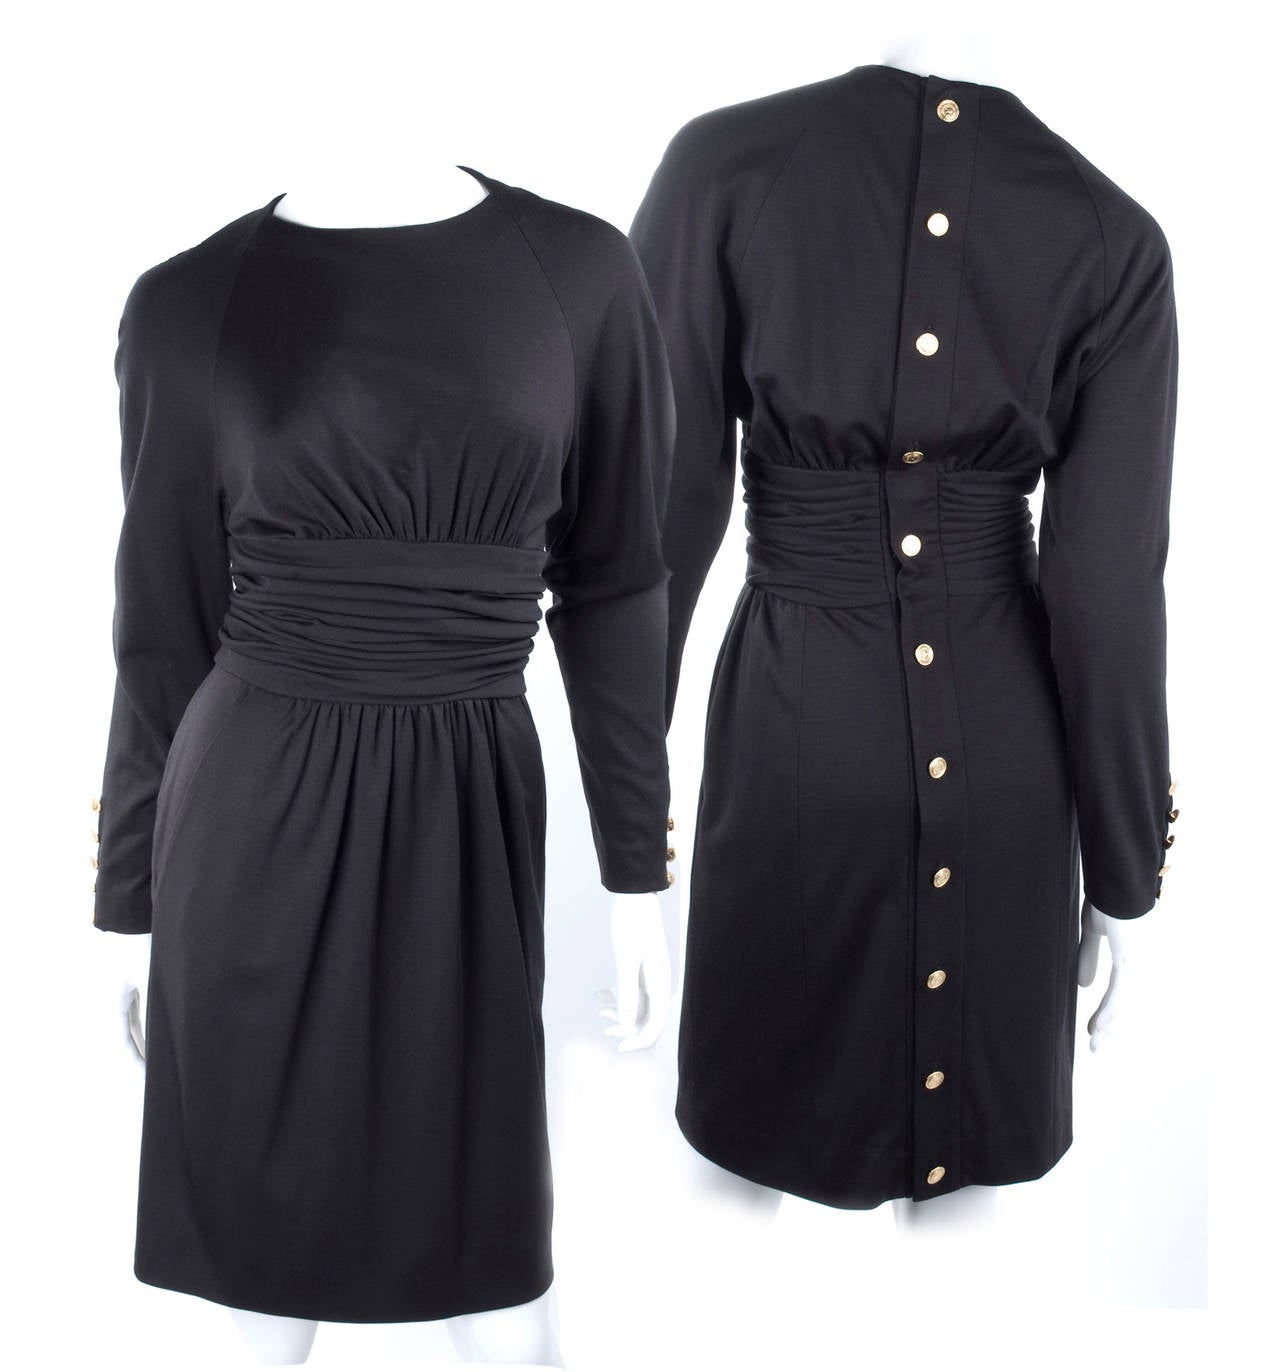 1987 Chanel Boutique Dress with Coco Buttons.
11 buttons in the back and 5 on each sleeve.
Black fine wool jersey, silk lining and pockets.
Size EU 36 - US 4 to 6
Excellent condition

Measurements:
Length 94 cm - 37